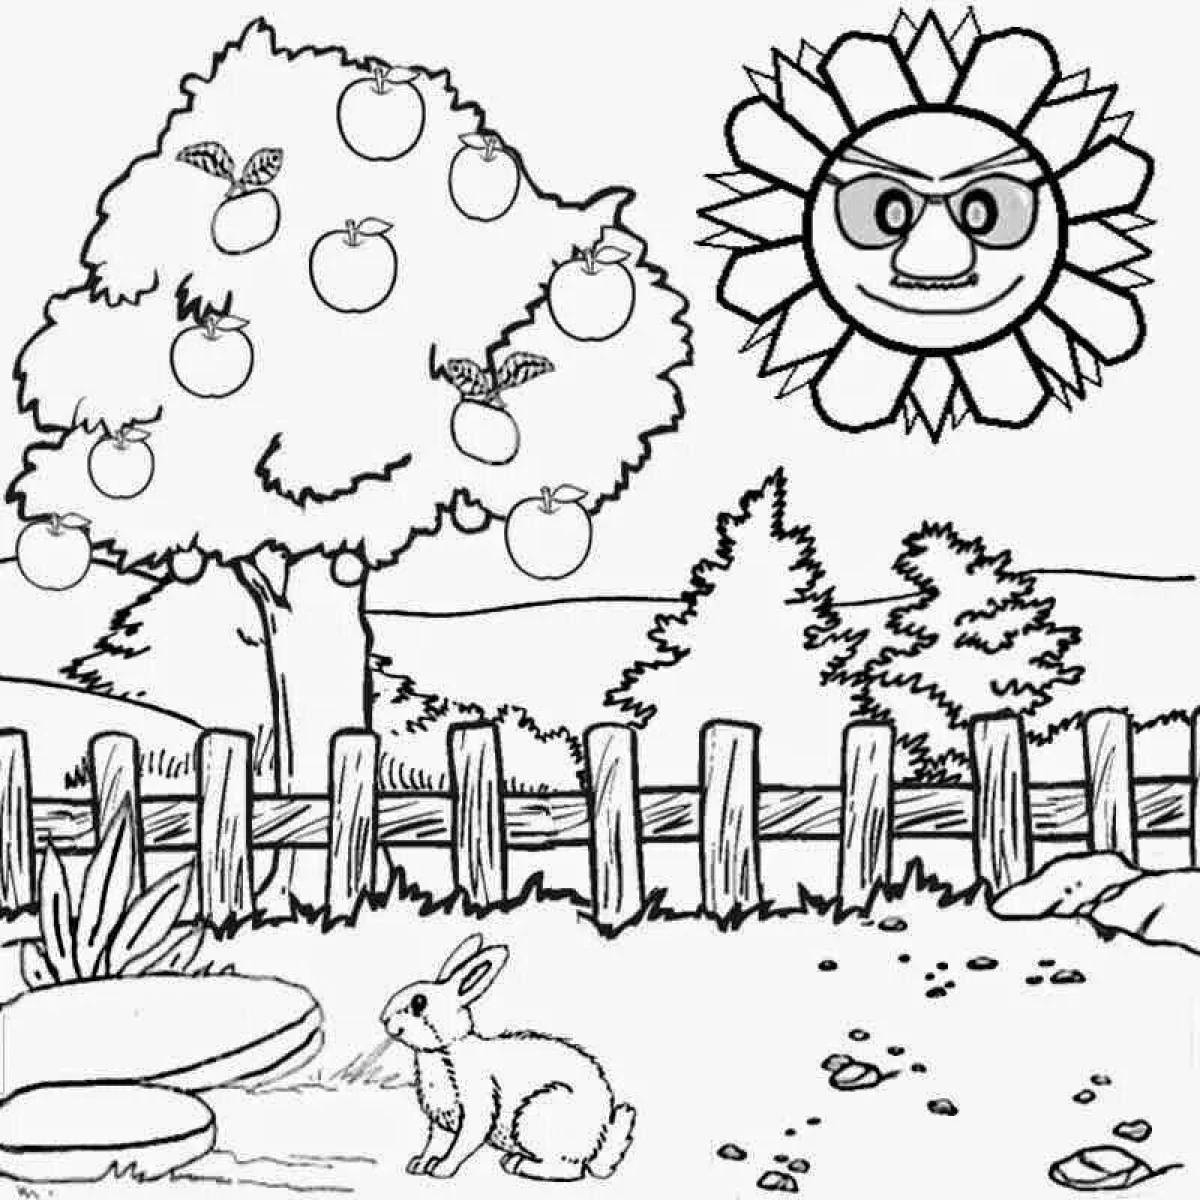 Colouring peaceful nature for children 6-7 years old